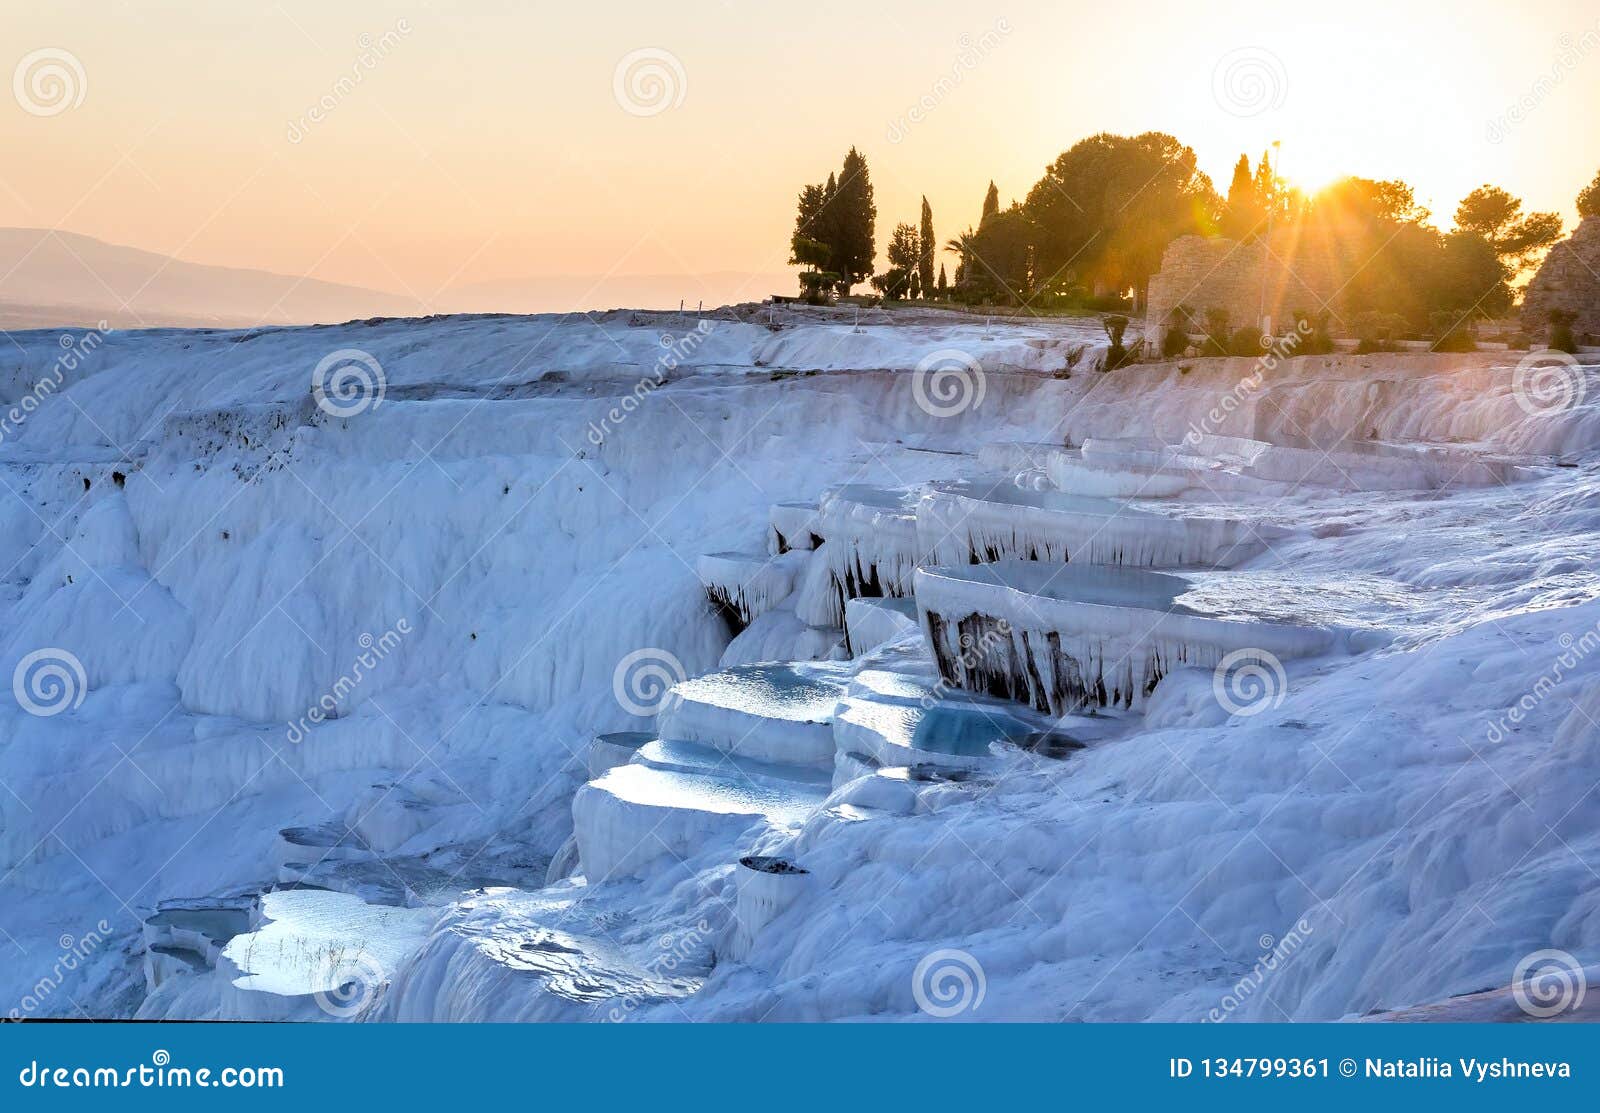 pools of pamukkale in turkey in sunset, contains hot springs and travertines, terraces of carbonate minerals left by water